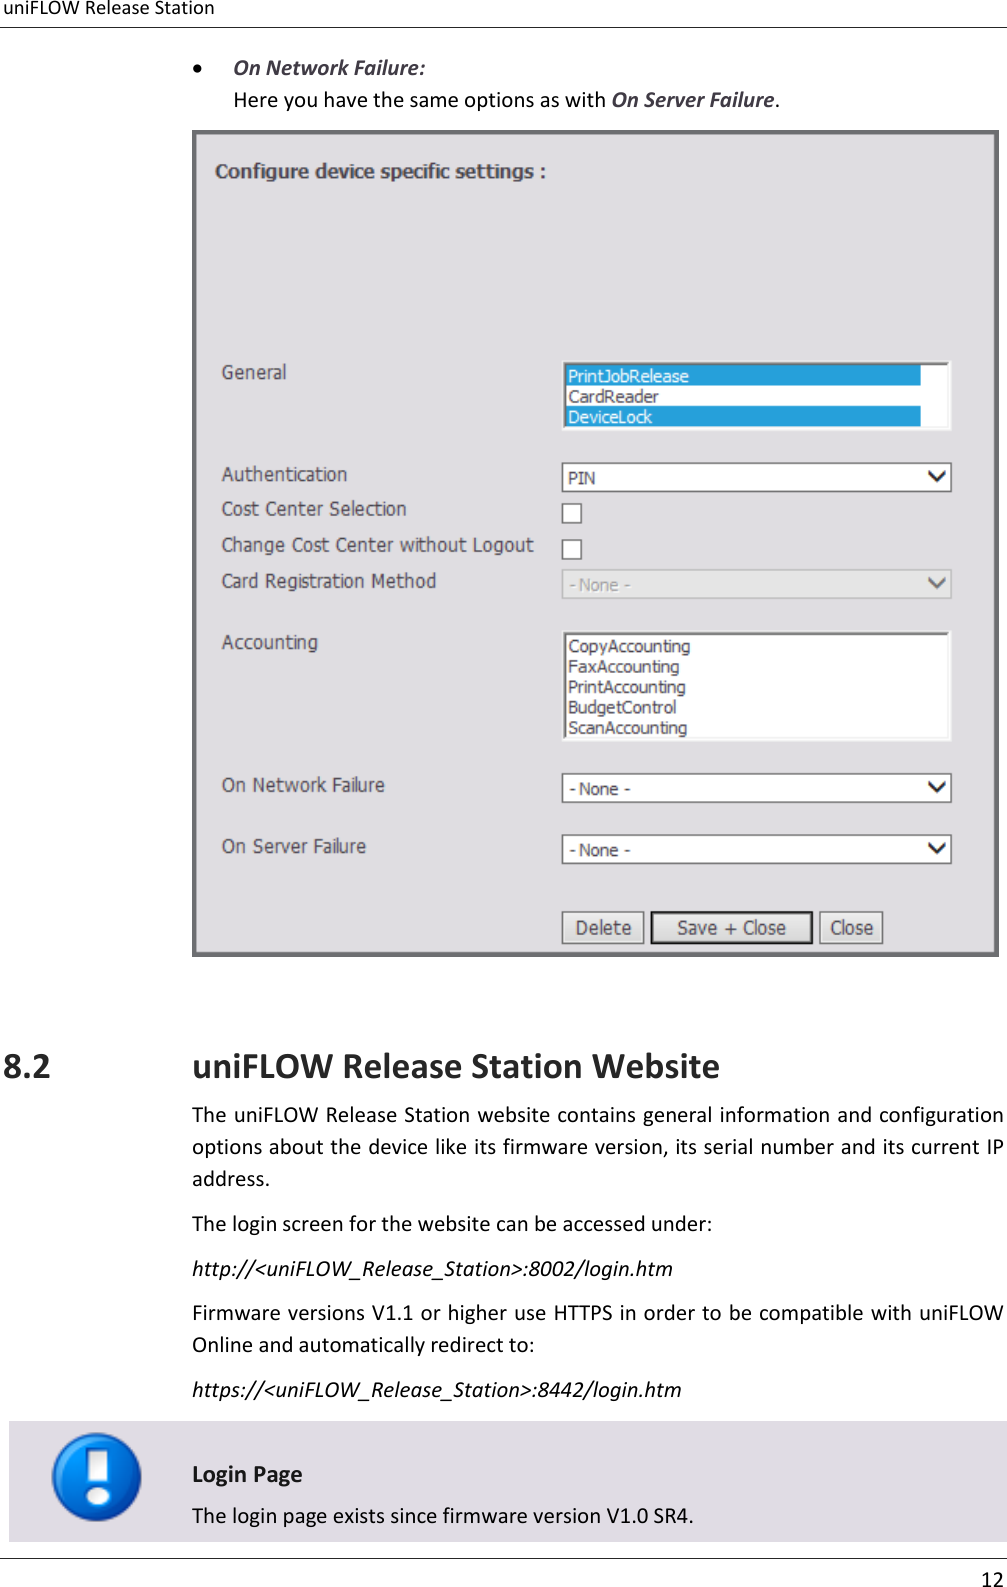 uniFLOW Release Station     12   On Network Failure: Here you have the same options as with On Server Failure.   8.2 uniFLOW Release Station Website The uniFLOW Release Station website contains general information and configuration options about the device like its firmware version, its serial number and its current IP address. The login screen for the website can be accessed under: http://&lt;uniFLOW_Release_Station&gt;:8002/login.htm Firmware versions V1.1 or higher use HTTPS in order to be compatible with uniFLOW Online and automatically redirect to: https://&lt;uniFLOW_Release_Station&gt;:8442/login.htm   Login Page The login page exists since firmware version V1.0 SR4. 